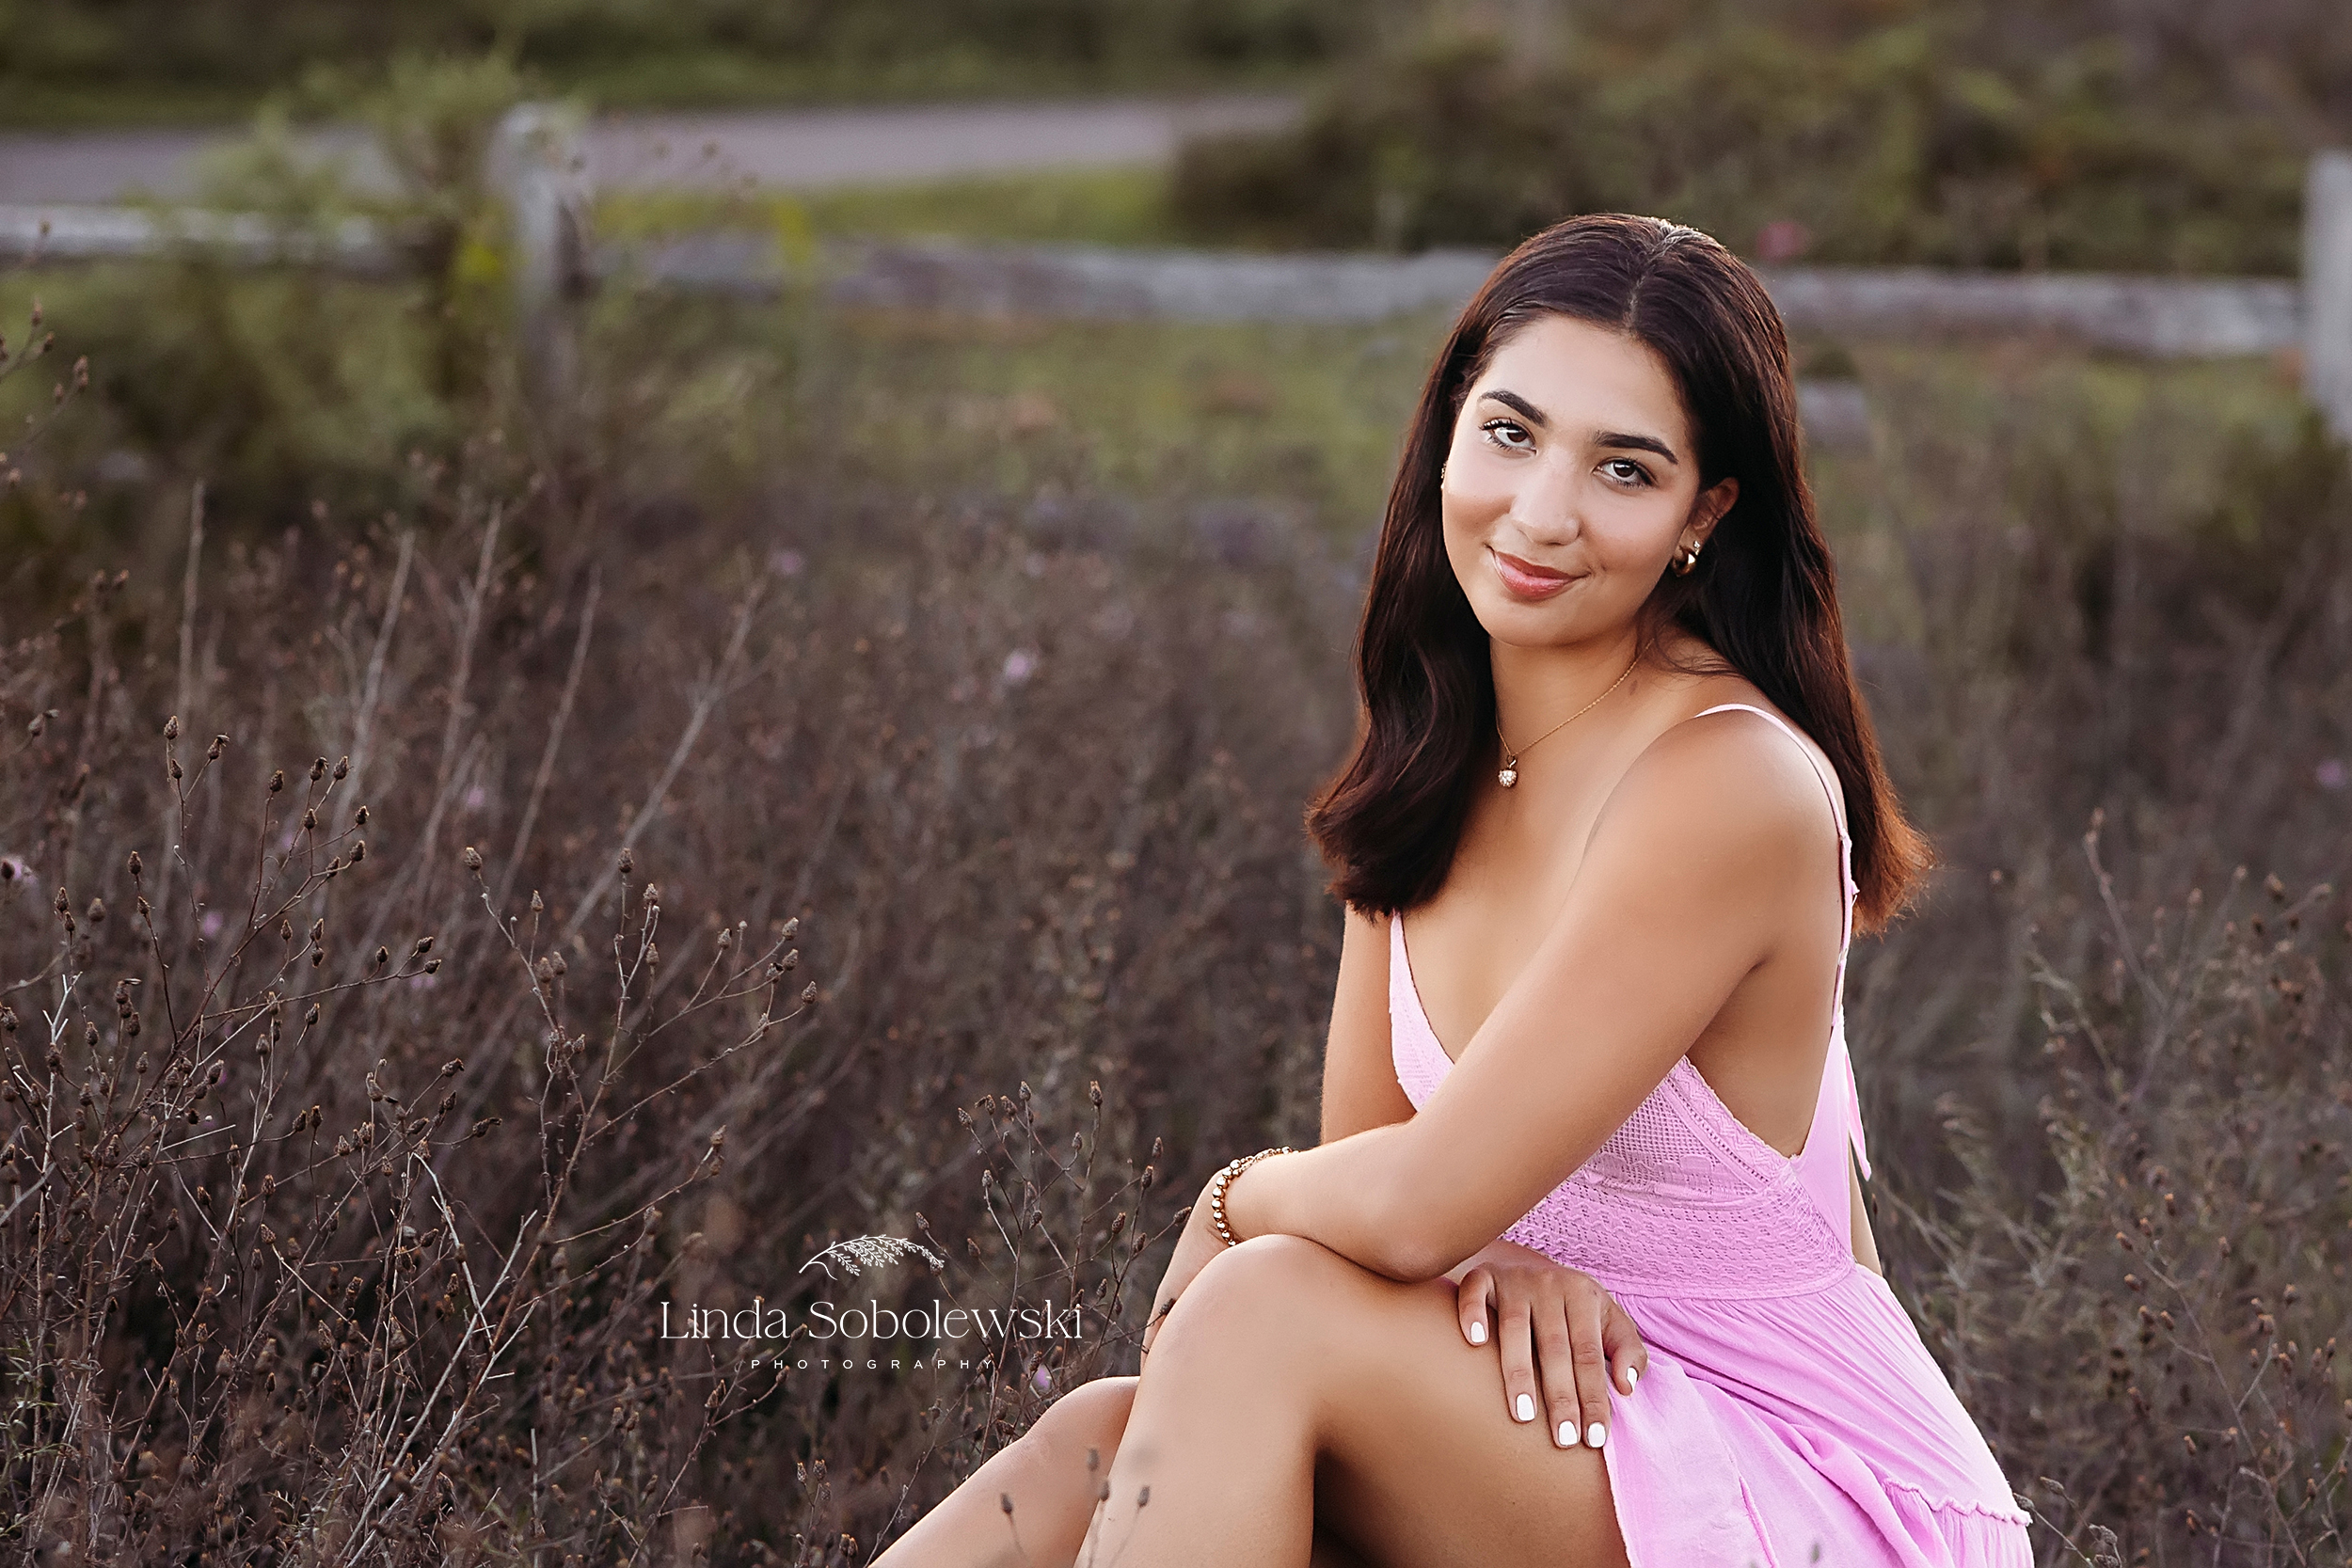 girl in pink dress sitting in a field, Madison CT High school senior girl photo shoot